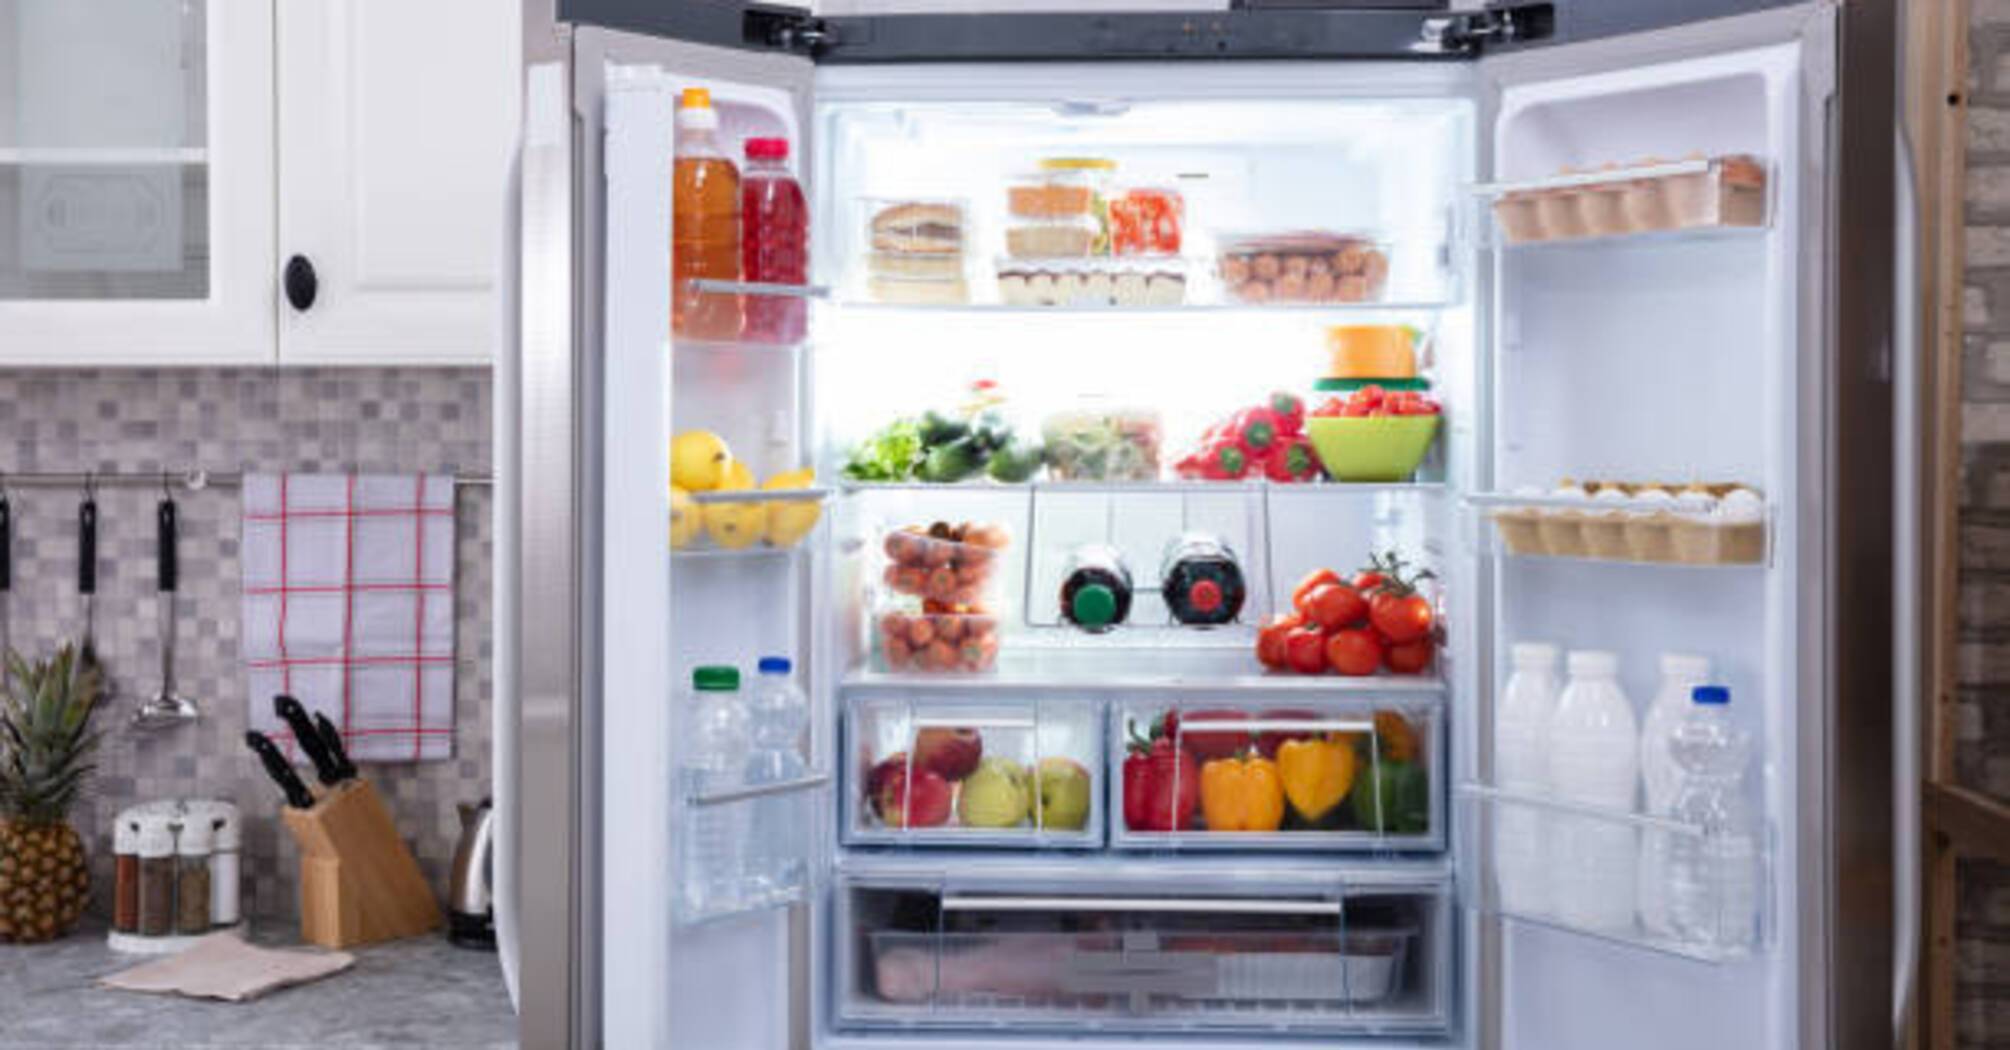 Effective ways to keep a fresh smell in the fridge